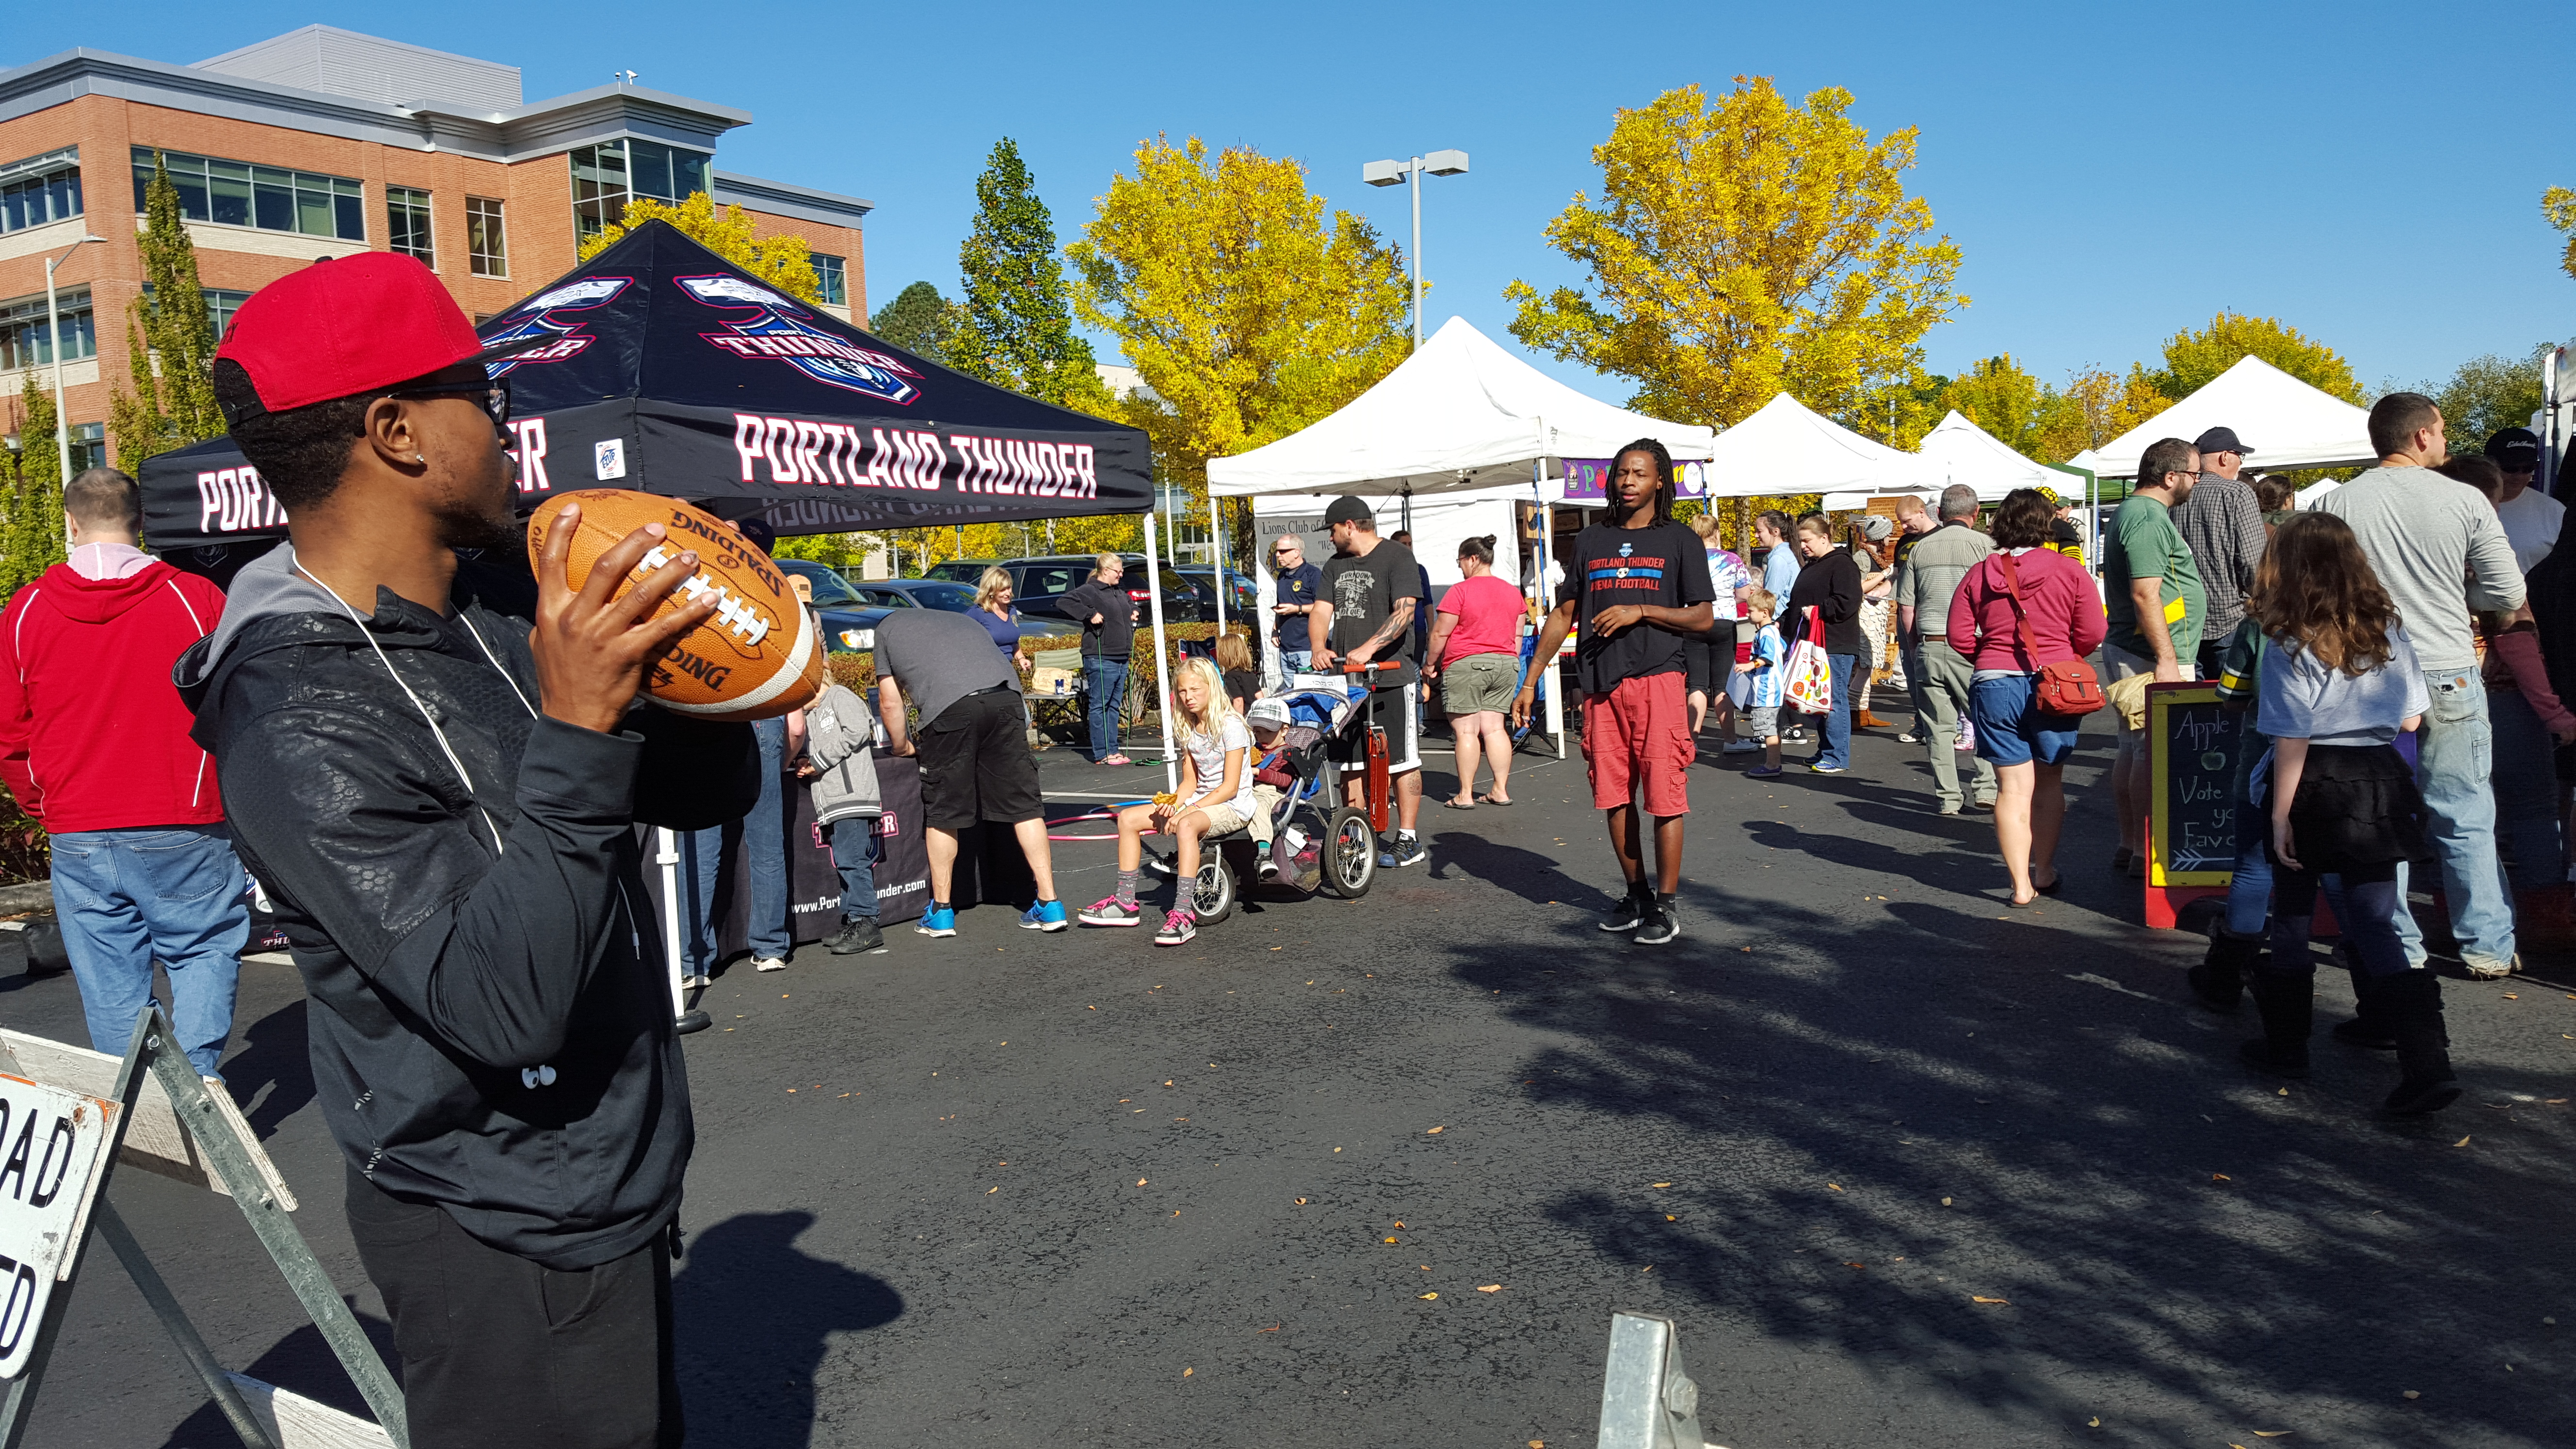 Fun last Saturday with the Portland Thunder...this week... Bike To Market Day! Obstacle course and prizes for the kids!